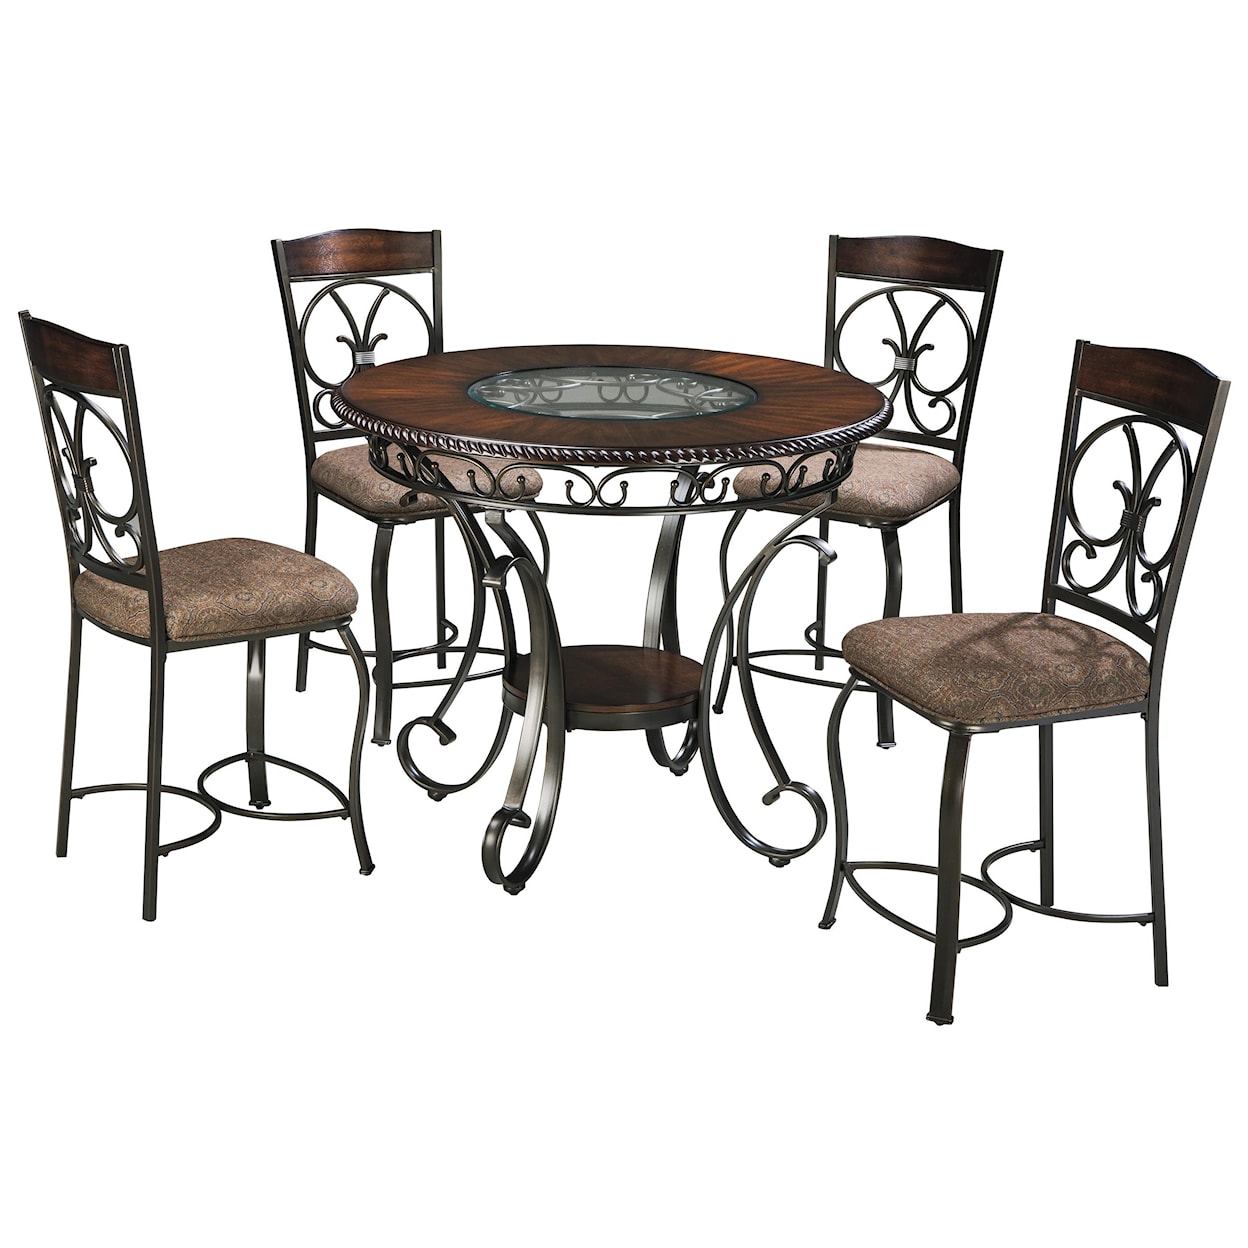 Michael Alan Select Glambrey Round Dining Table and Chair Set